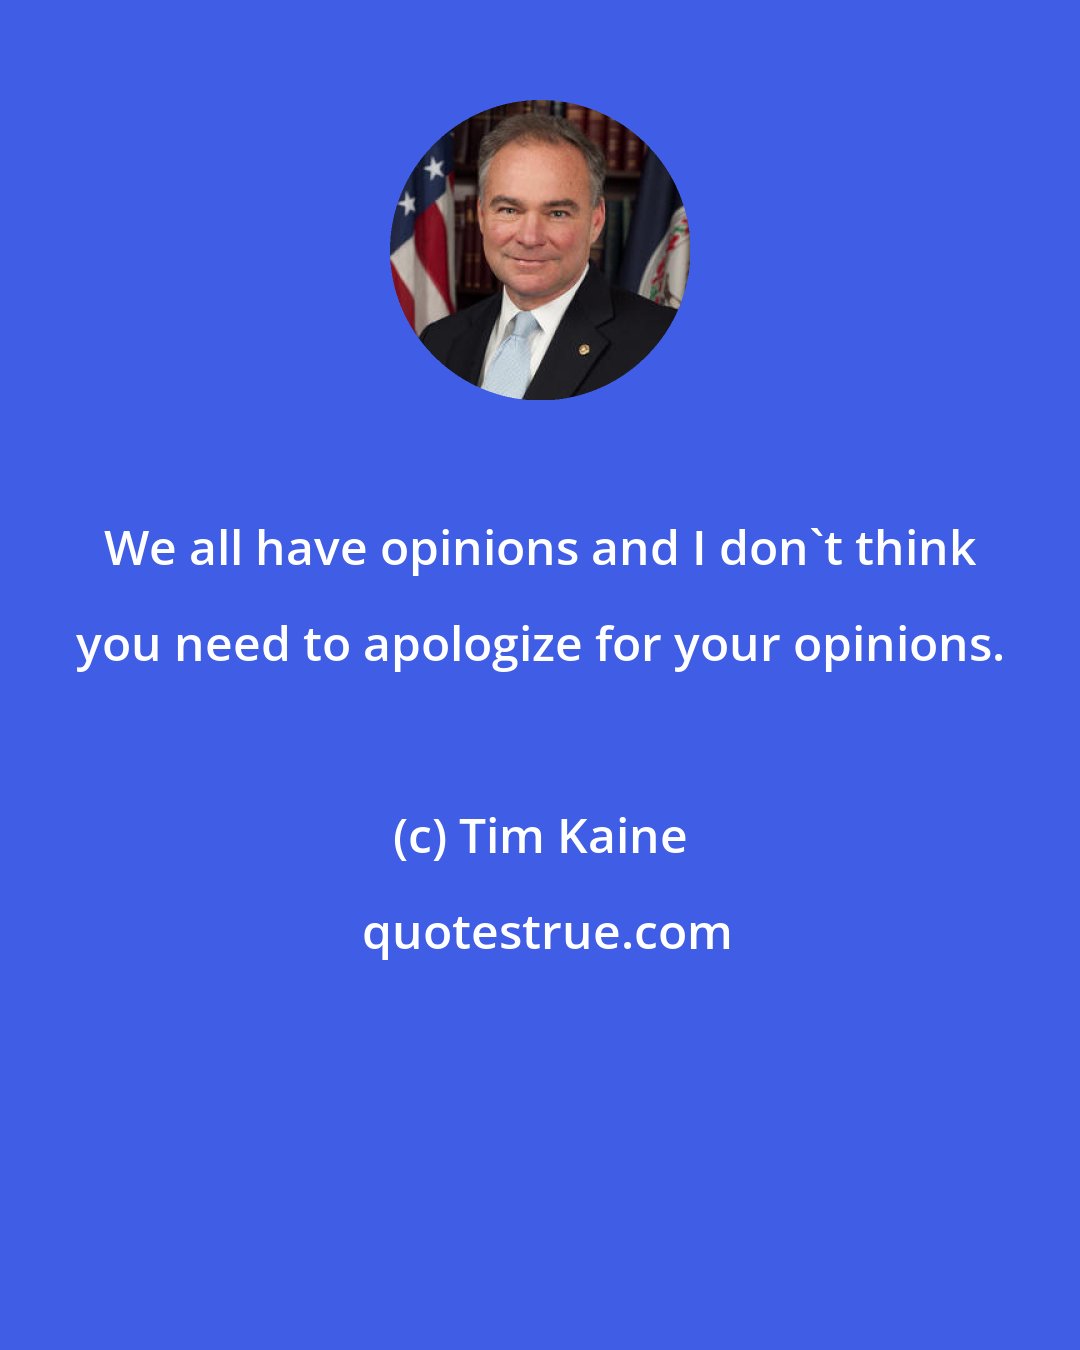 Tim Kaine: We all have opinions and I don't think you need to apologize for your opinions.